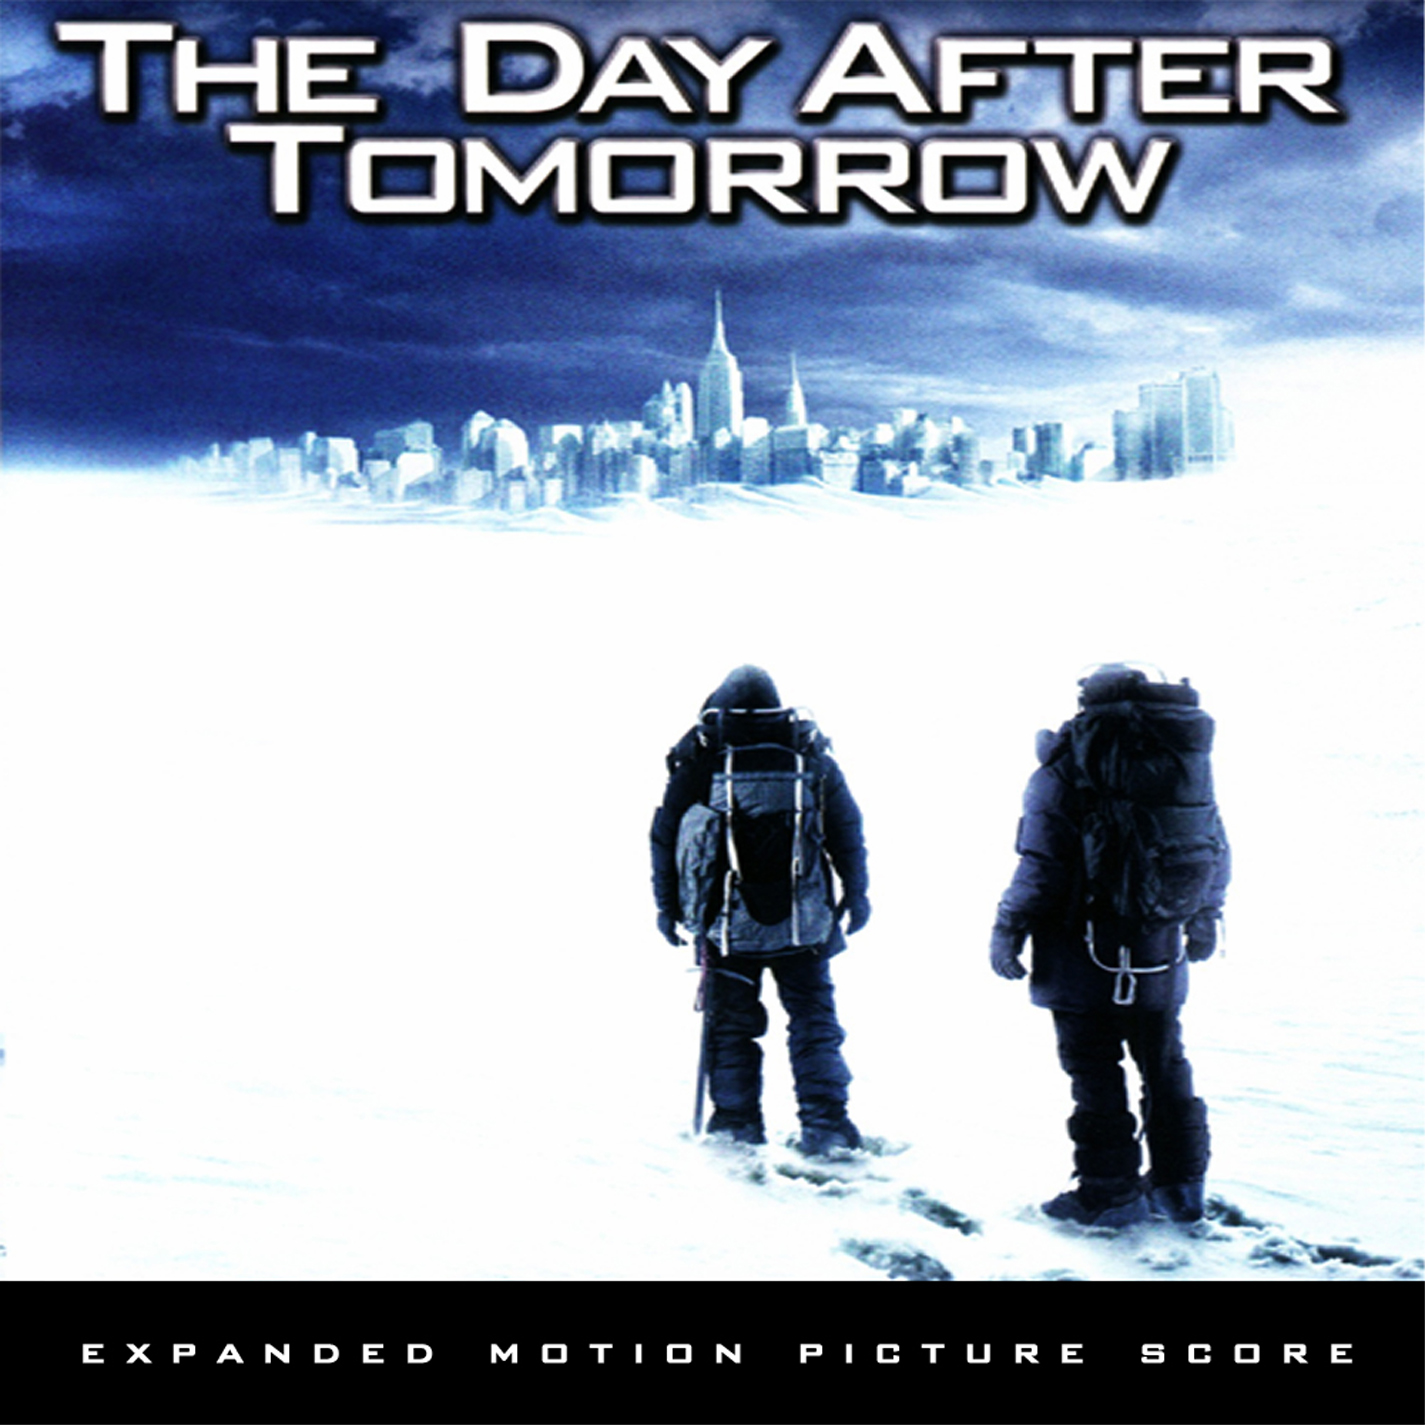 The Day after tomorrow. Days after. The Day after tomorrow игра. The Day after tomorrow Band.